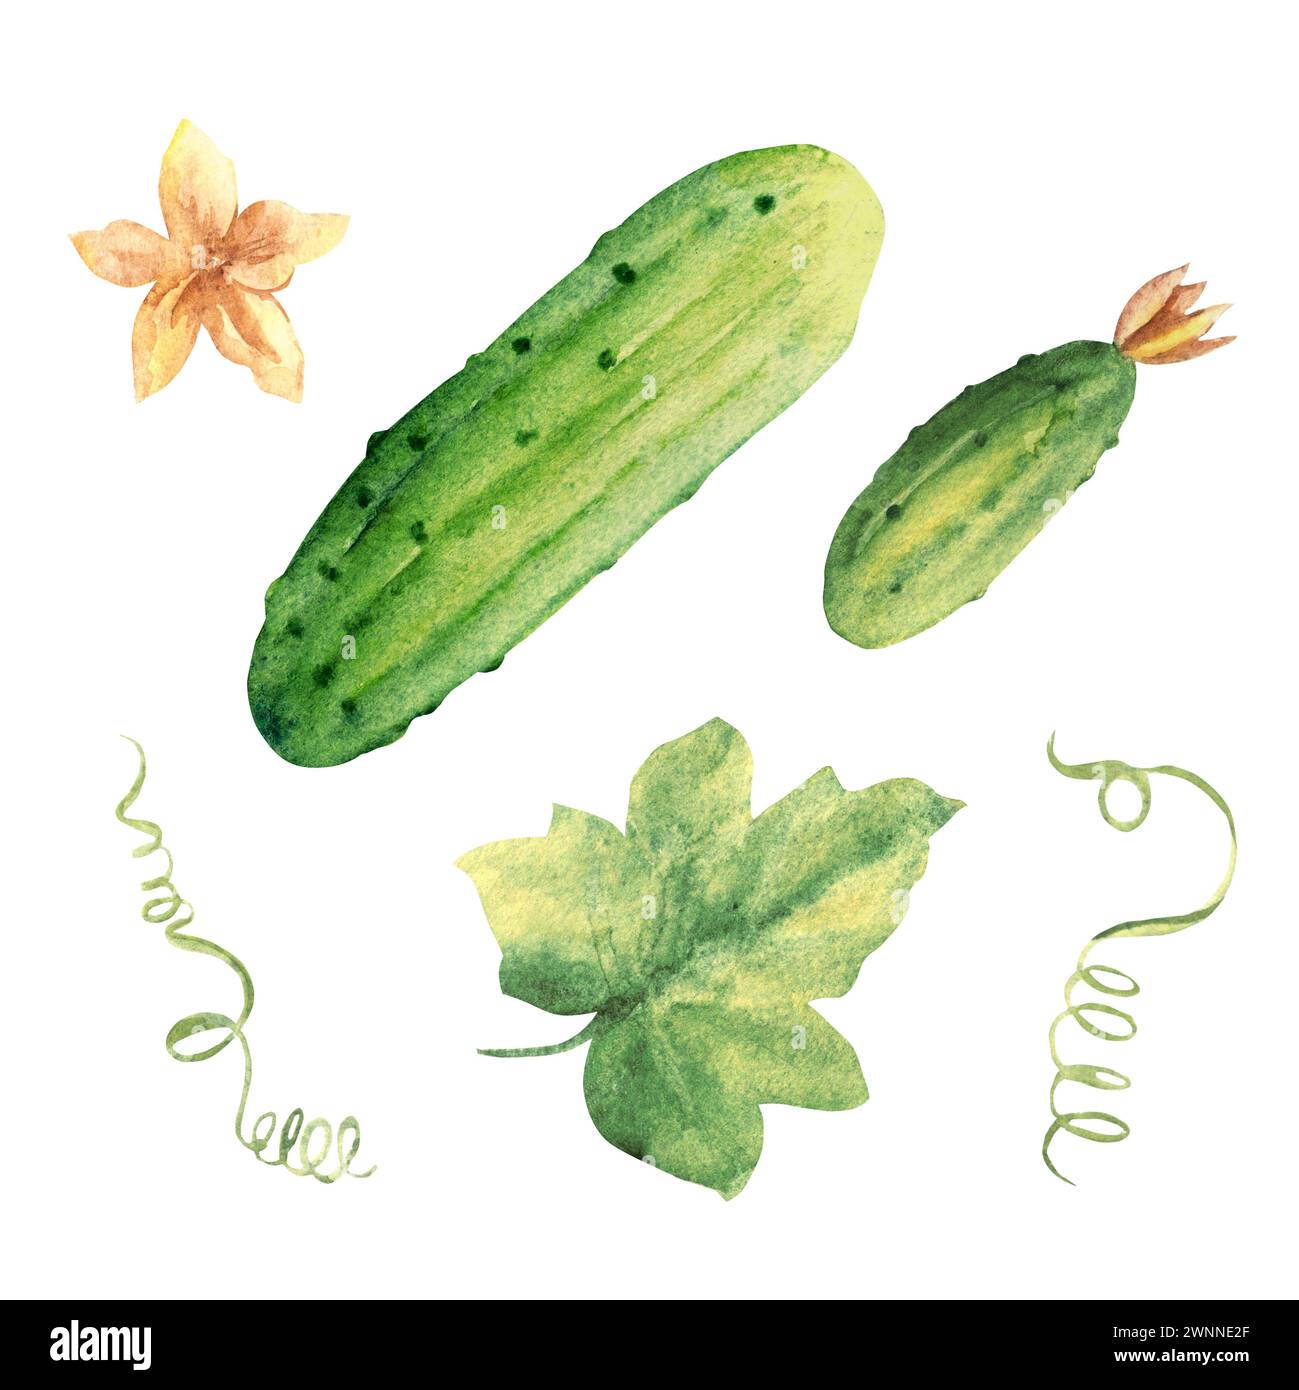 Cucumbers plant with leaves and flowers. Big and small, top view. Hand drawn botanical watercolor illustration on white background. Stock Photo